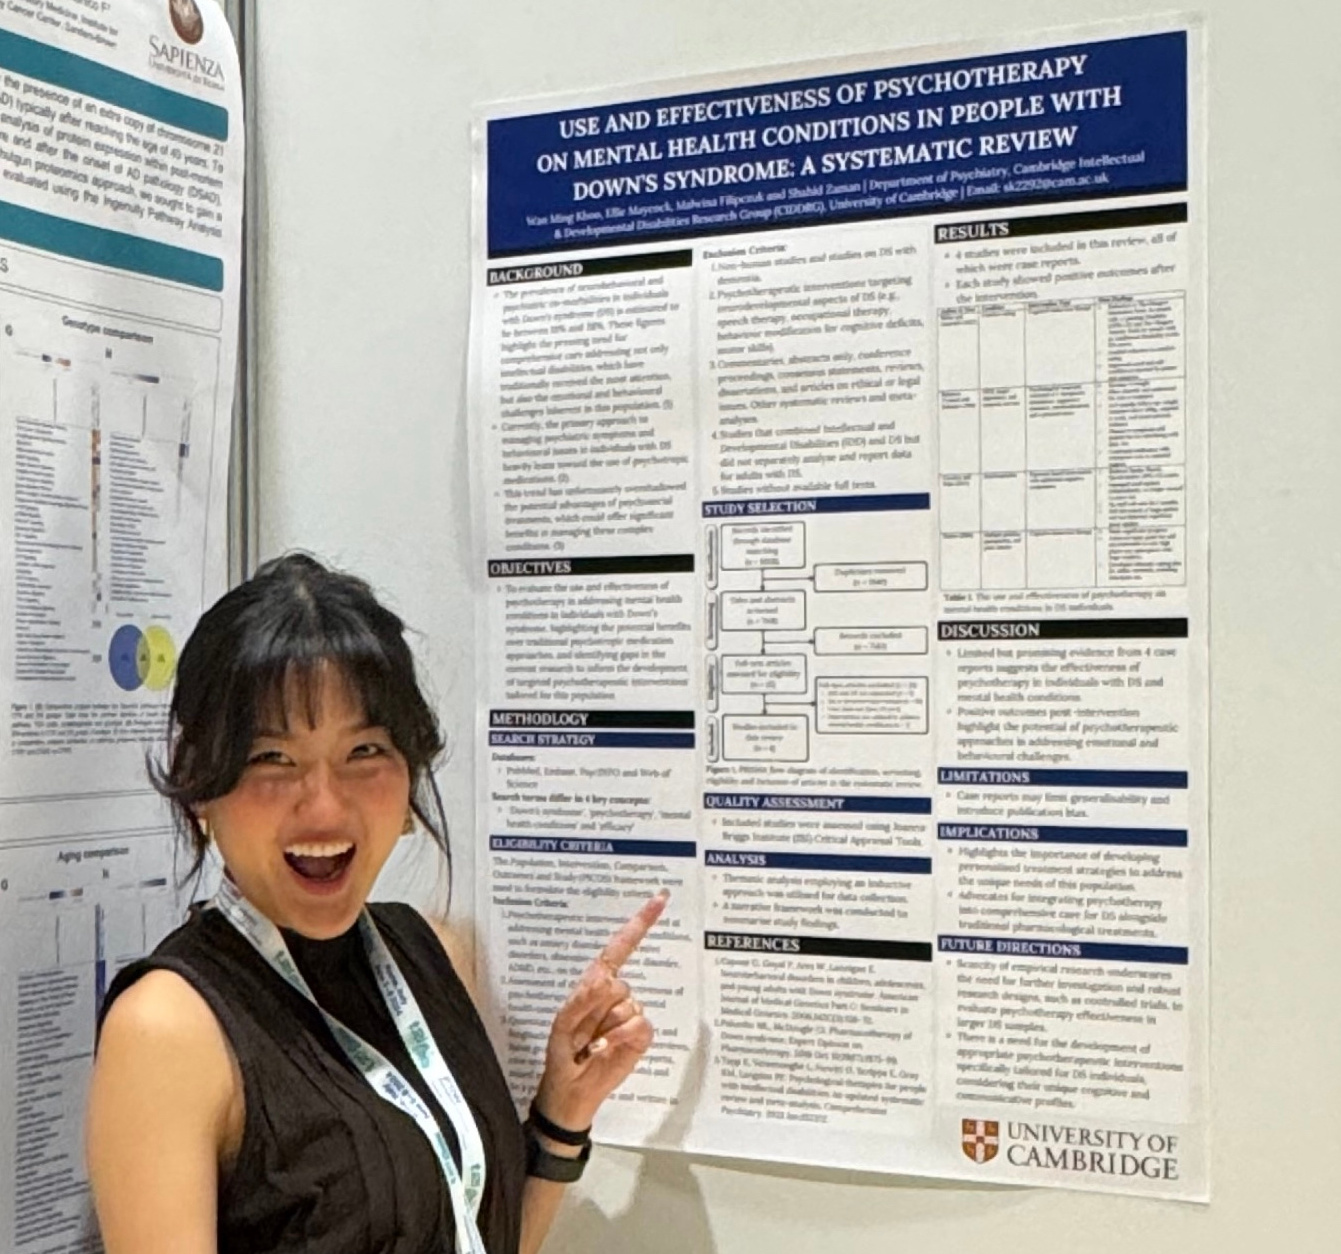 Sarah stands in front of her research poster entitled Use and effectiveness of psychotherapy on mental health conditions in people with Down's syndrome: a systematic review